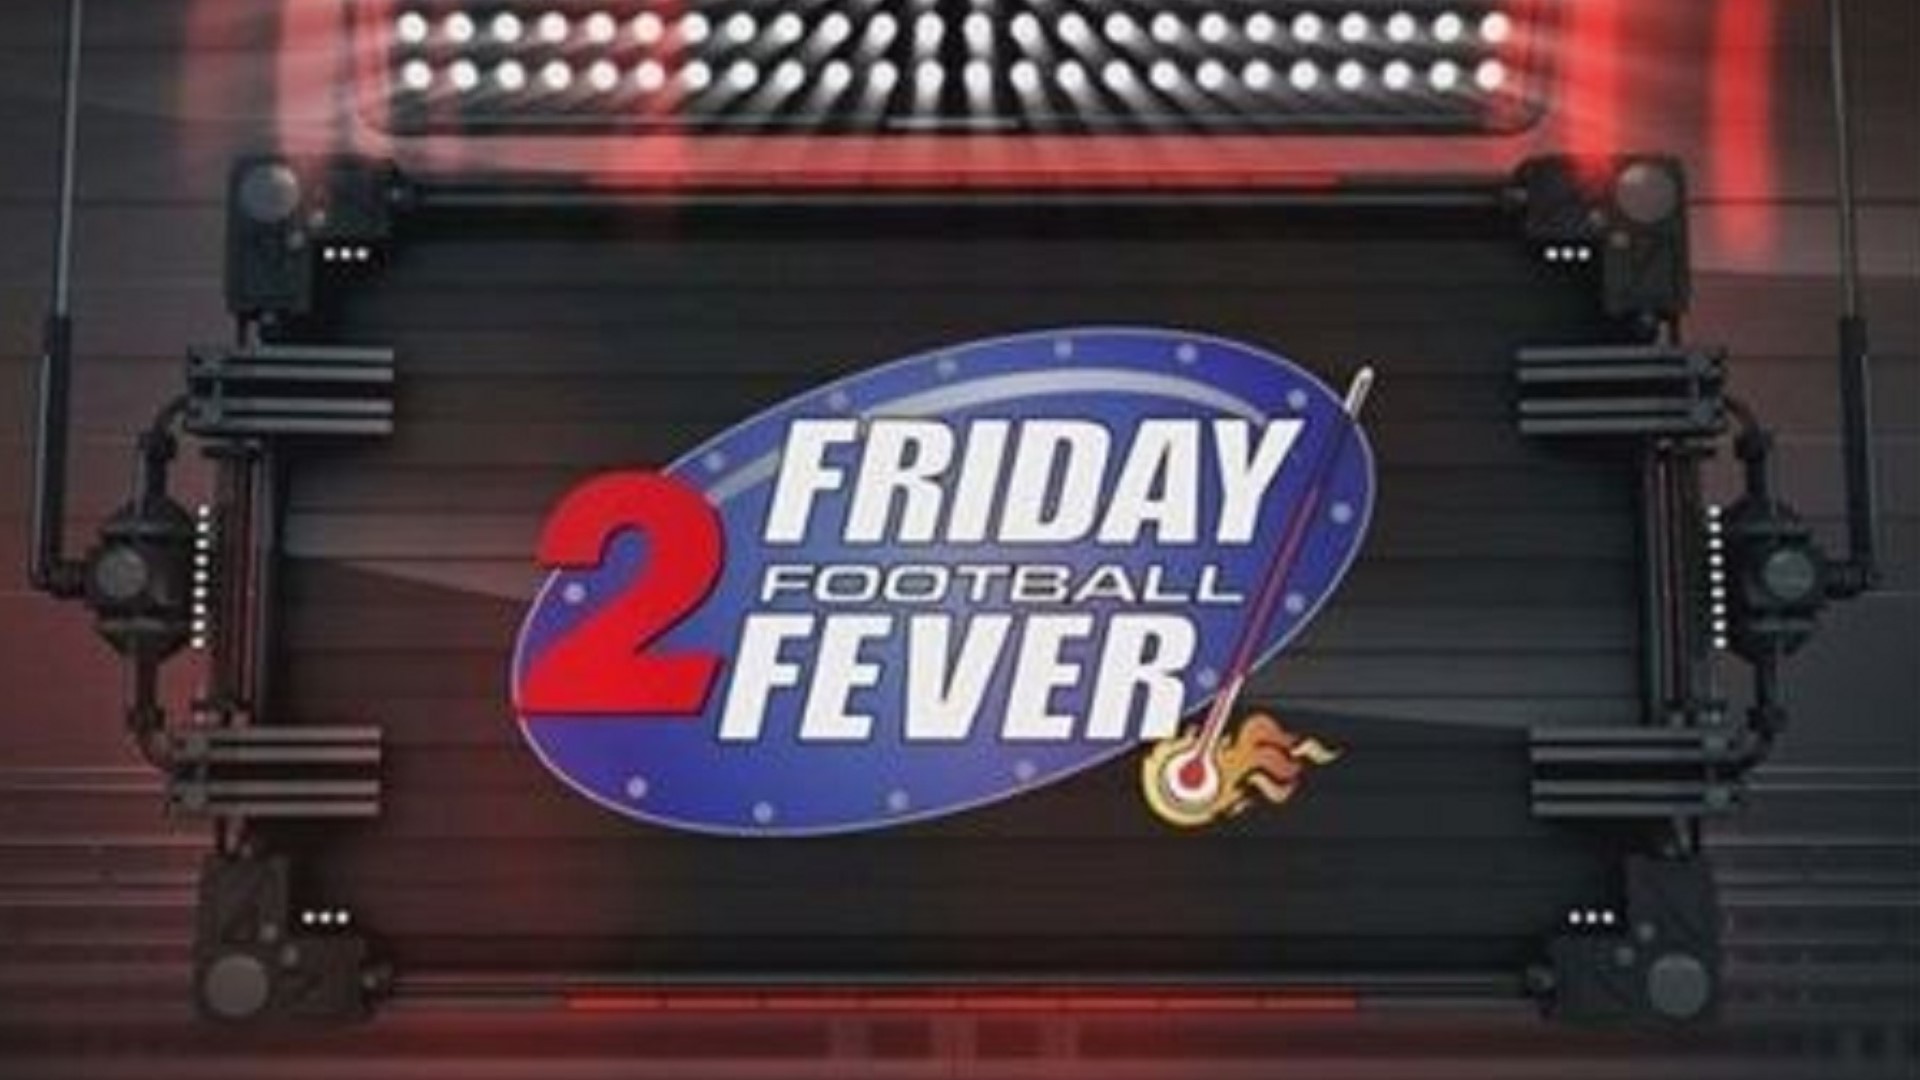 Here are the top 5 plays for week 4 of Friday Football Fever!